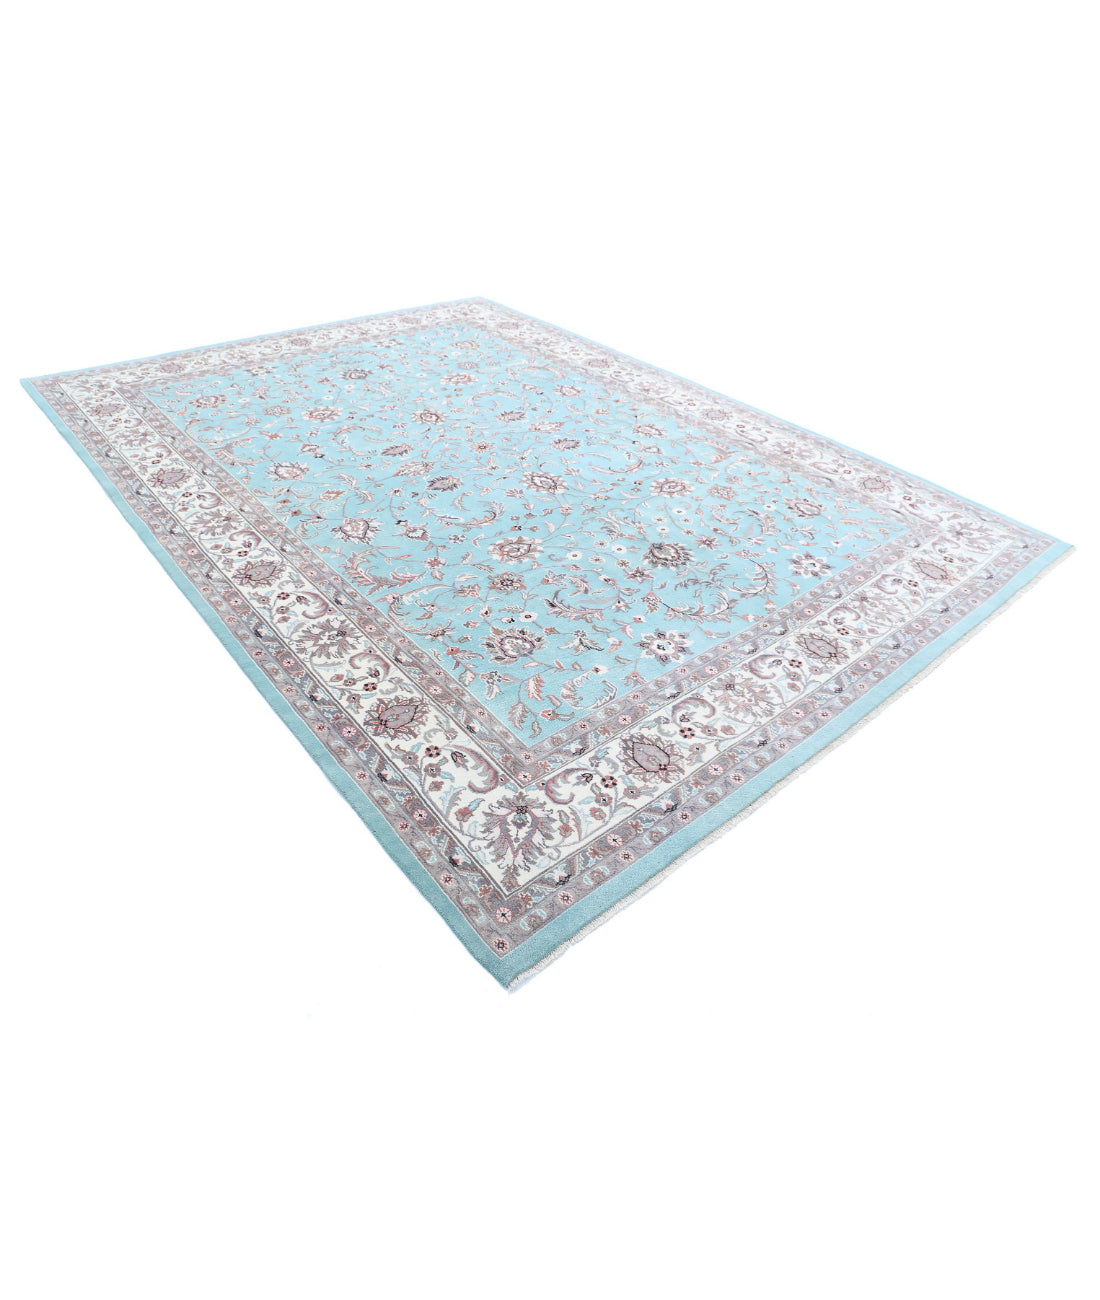 Heritage 8'10'' X 12'0'' Hand-Knotted Wool Rug 8'10'' x 12'0'' (265 X 360) / Blue / Ivory